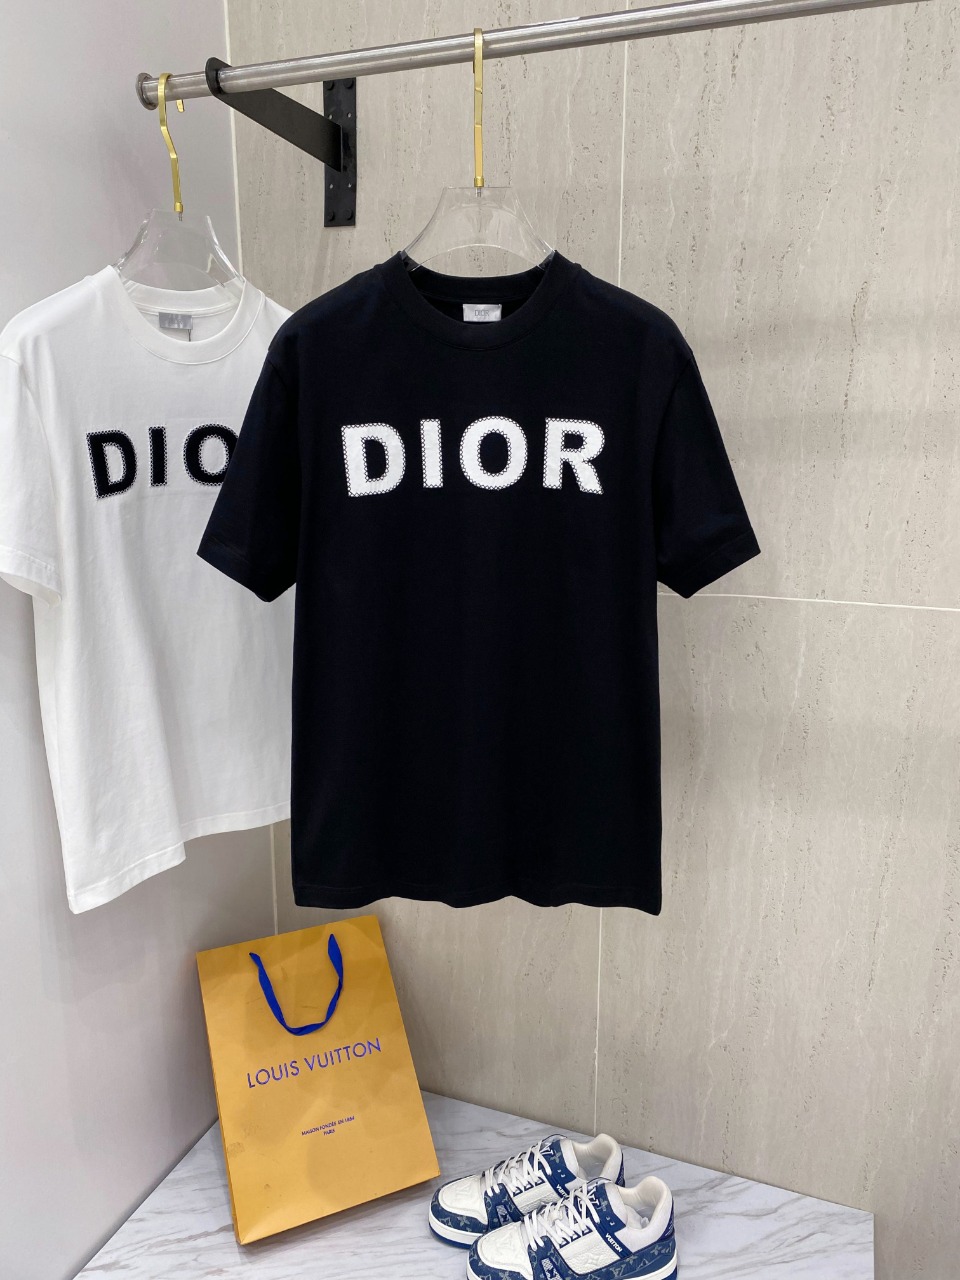 Dior Clothing T-Shirt Black White Yellow Unisex Cotton Spring/Summer Collection Short Sleeve